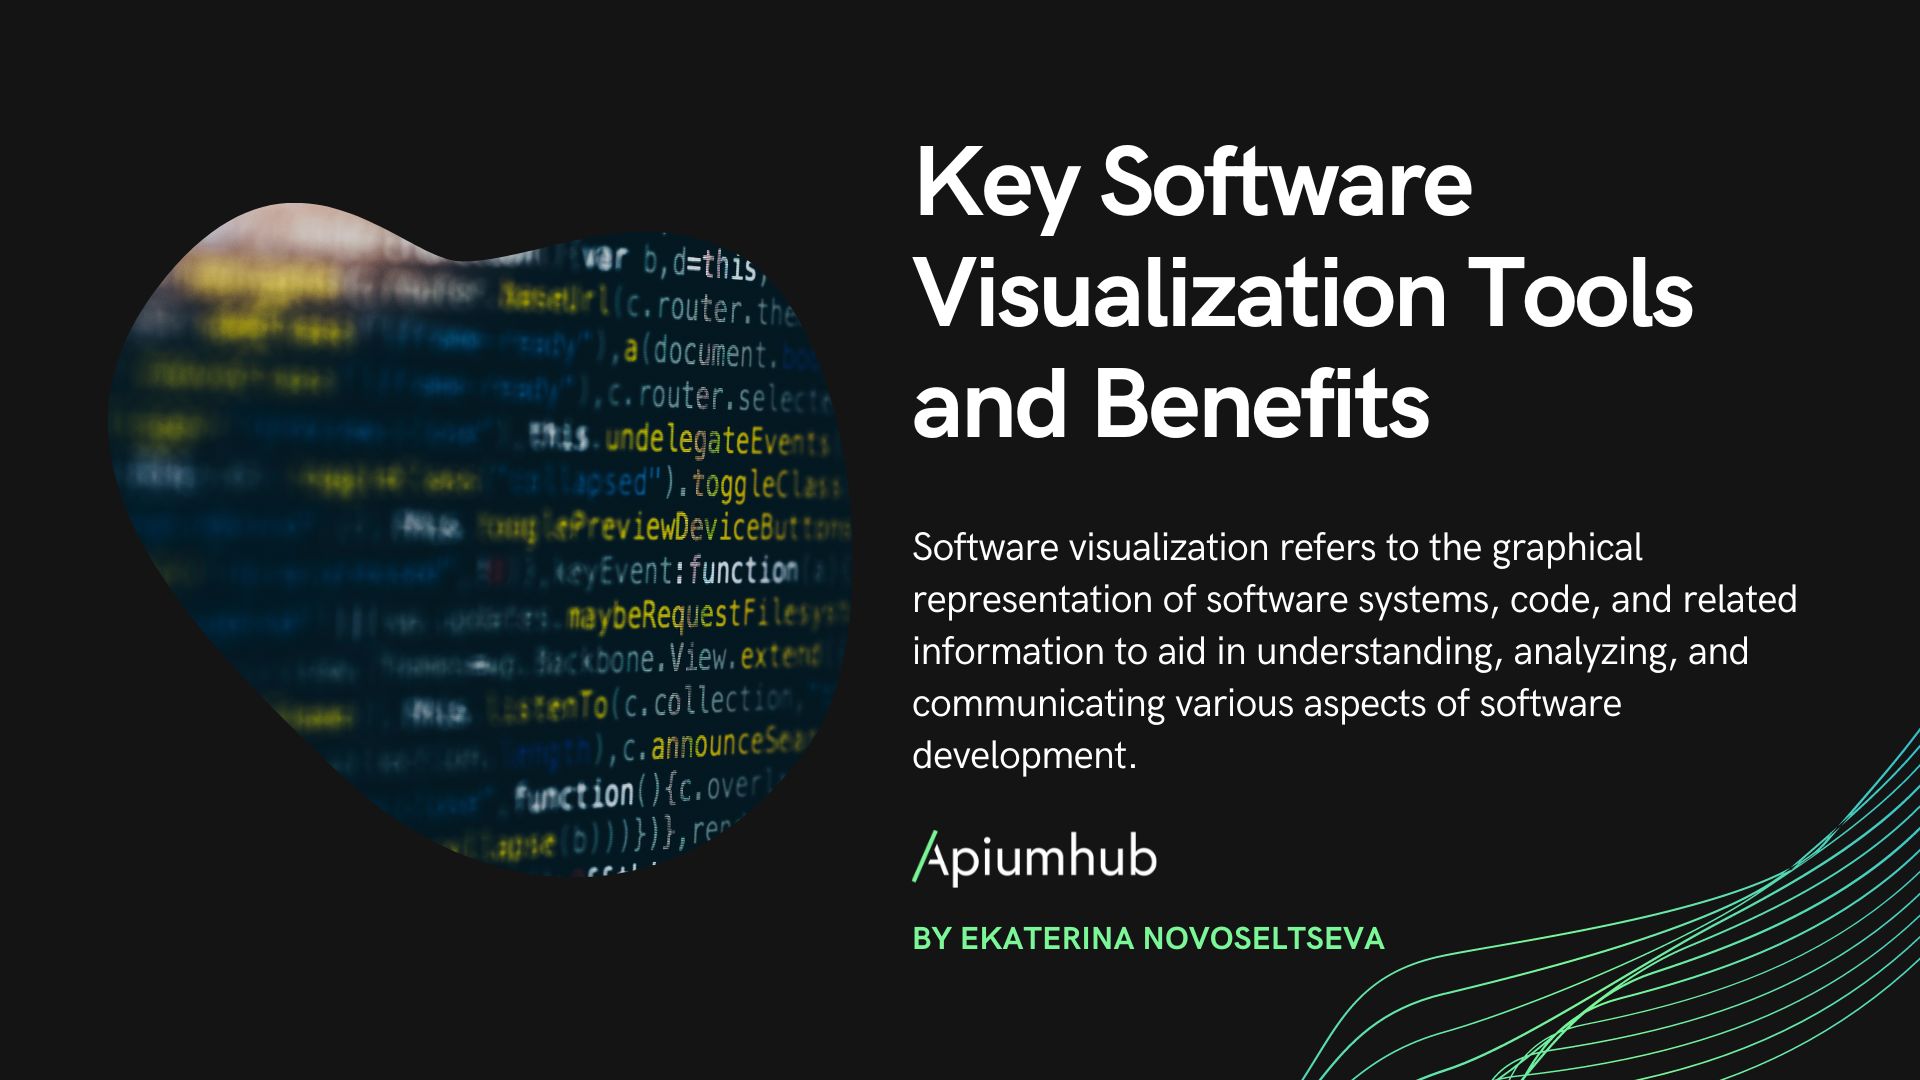 Key Software Visualization Tools and Benefits